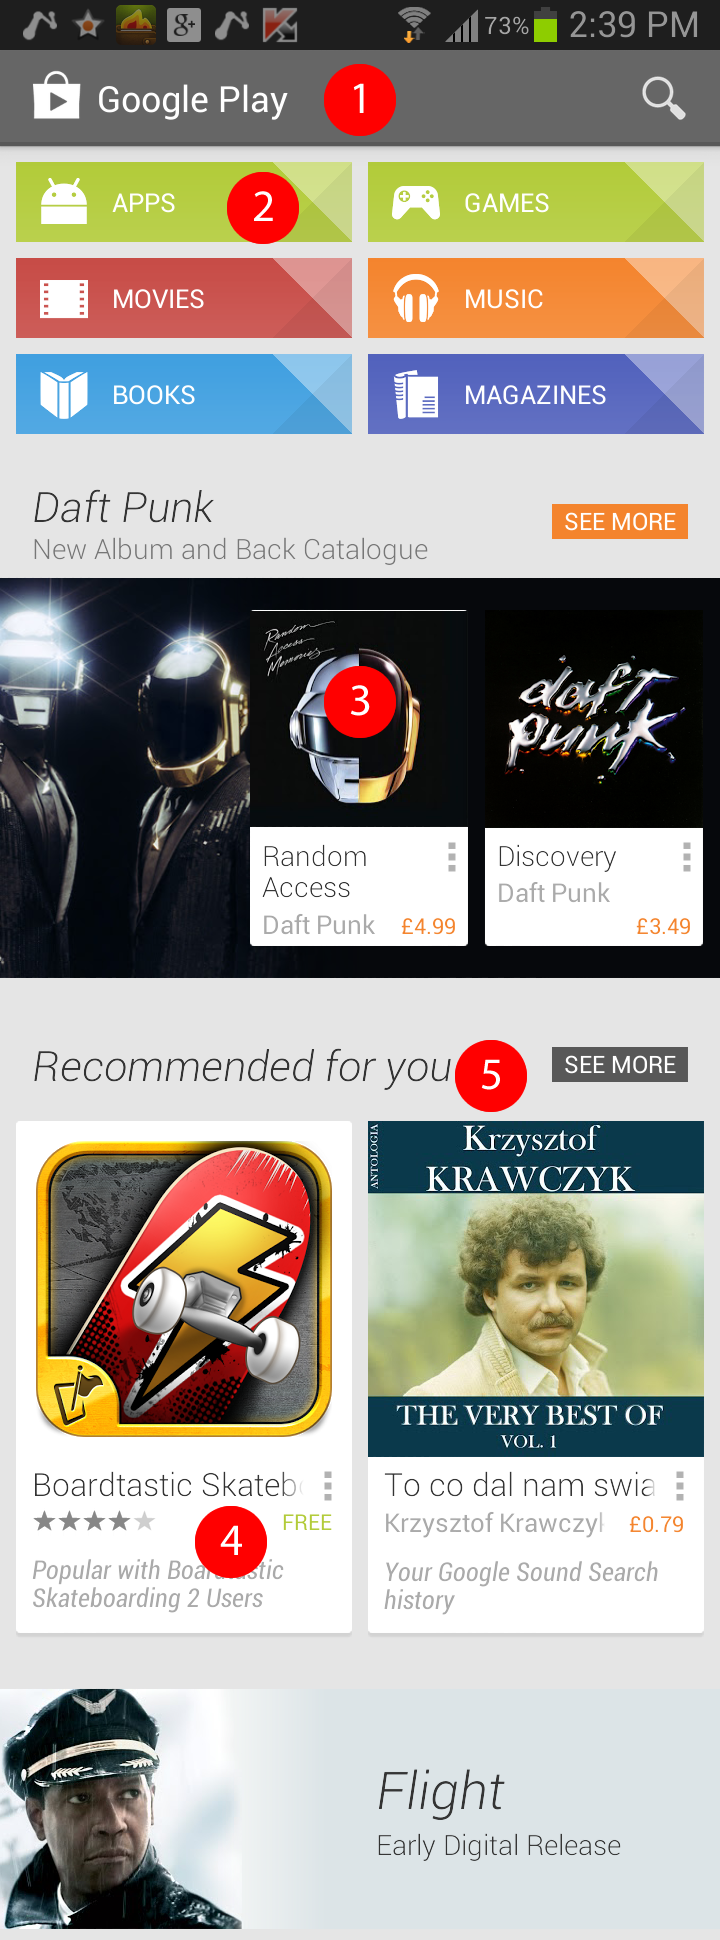 Google Play Store App Home Page